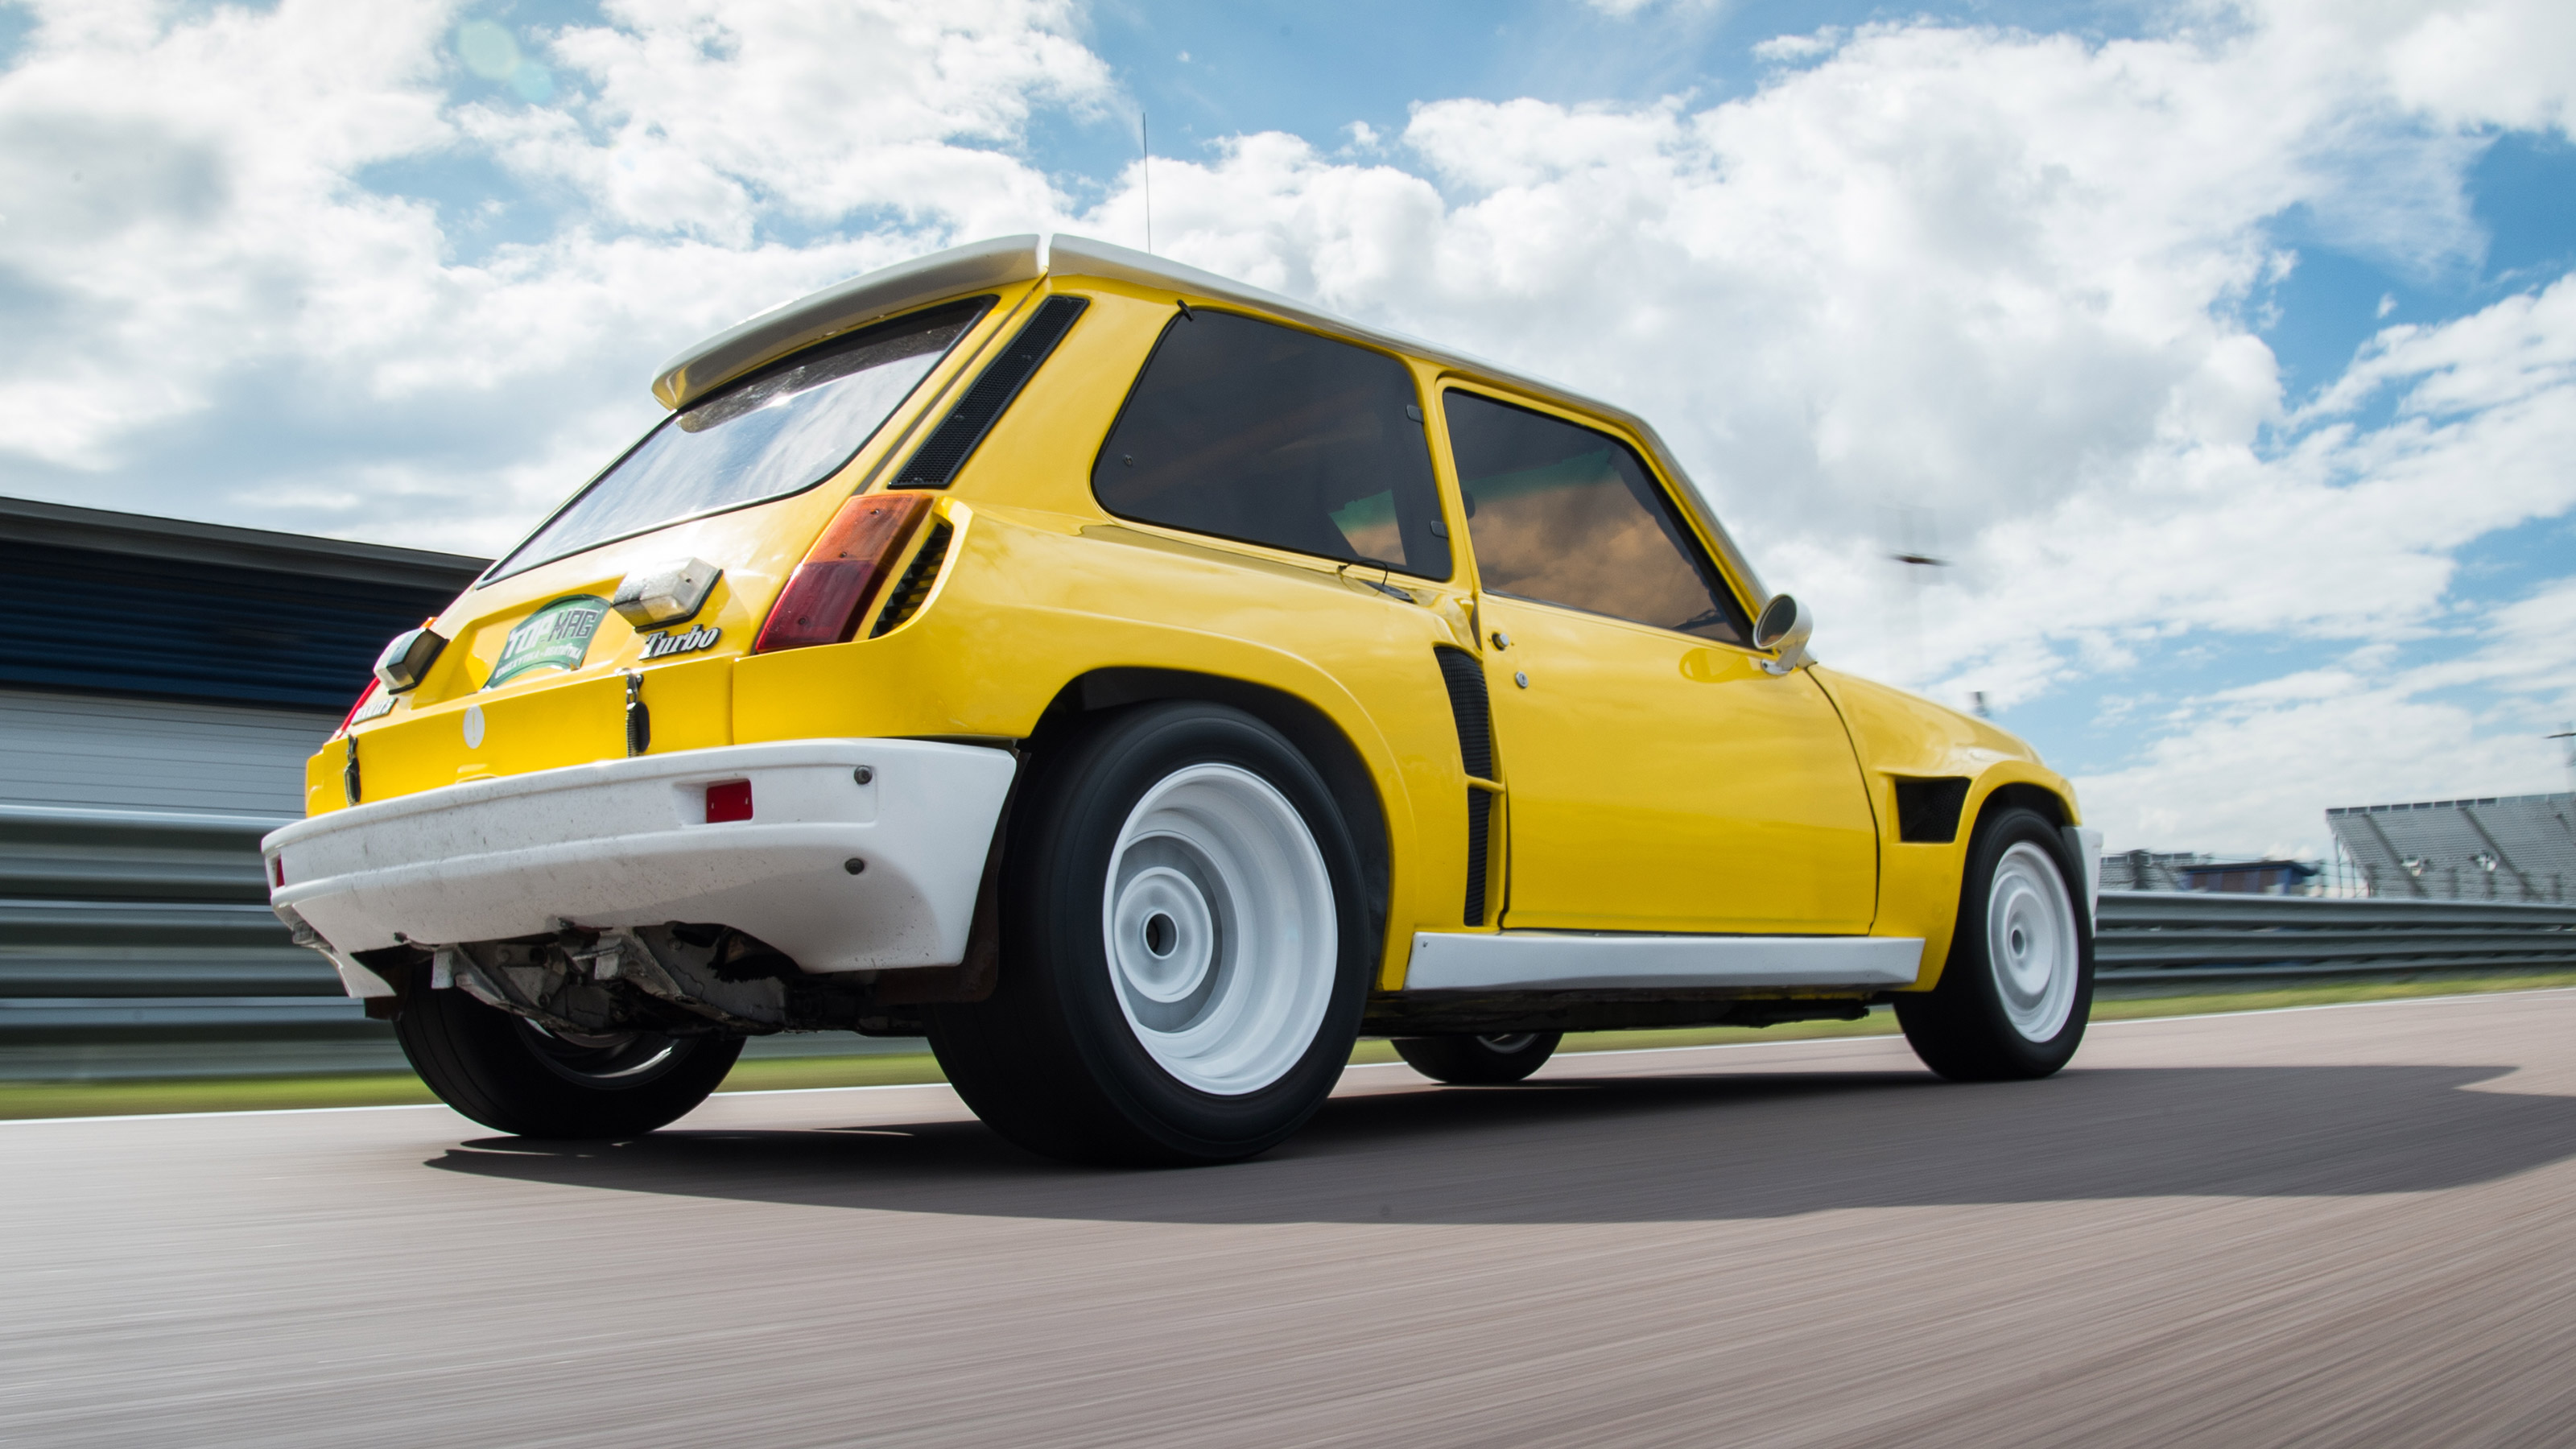 Renault 5 Turbo: review, history and specs of an icon